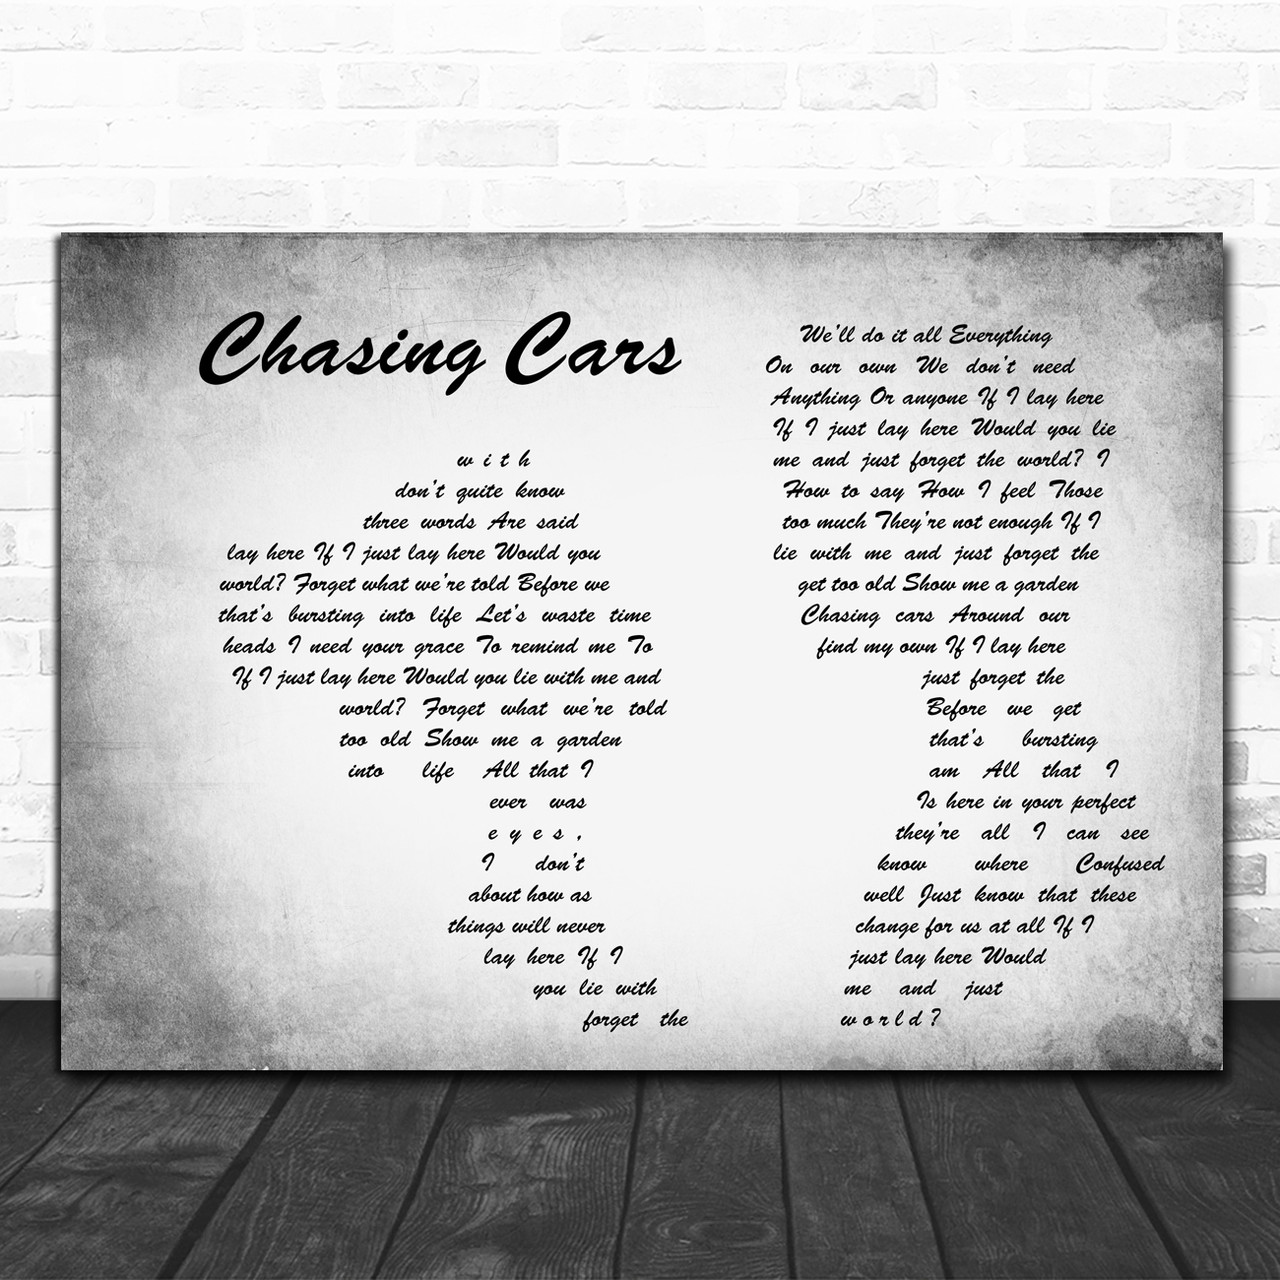 Chasing Cars - song and lyrics by Snow Patrol